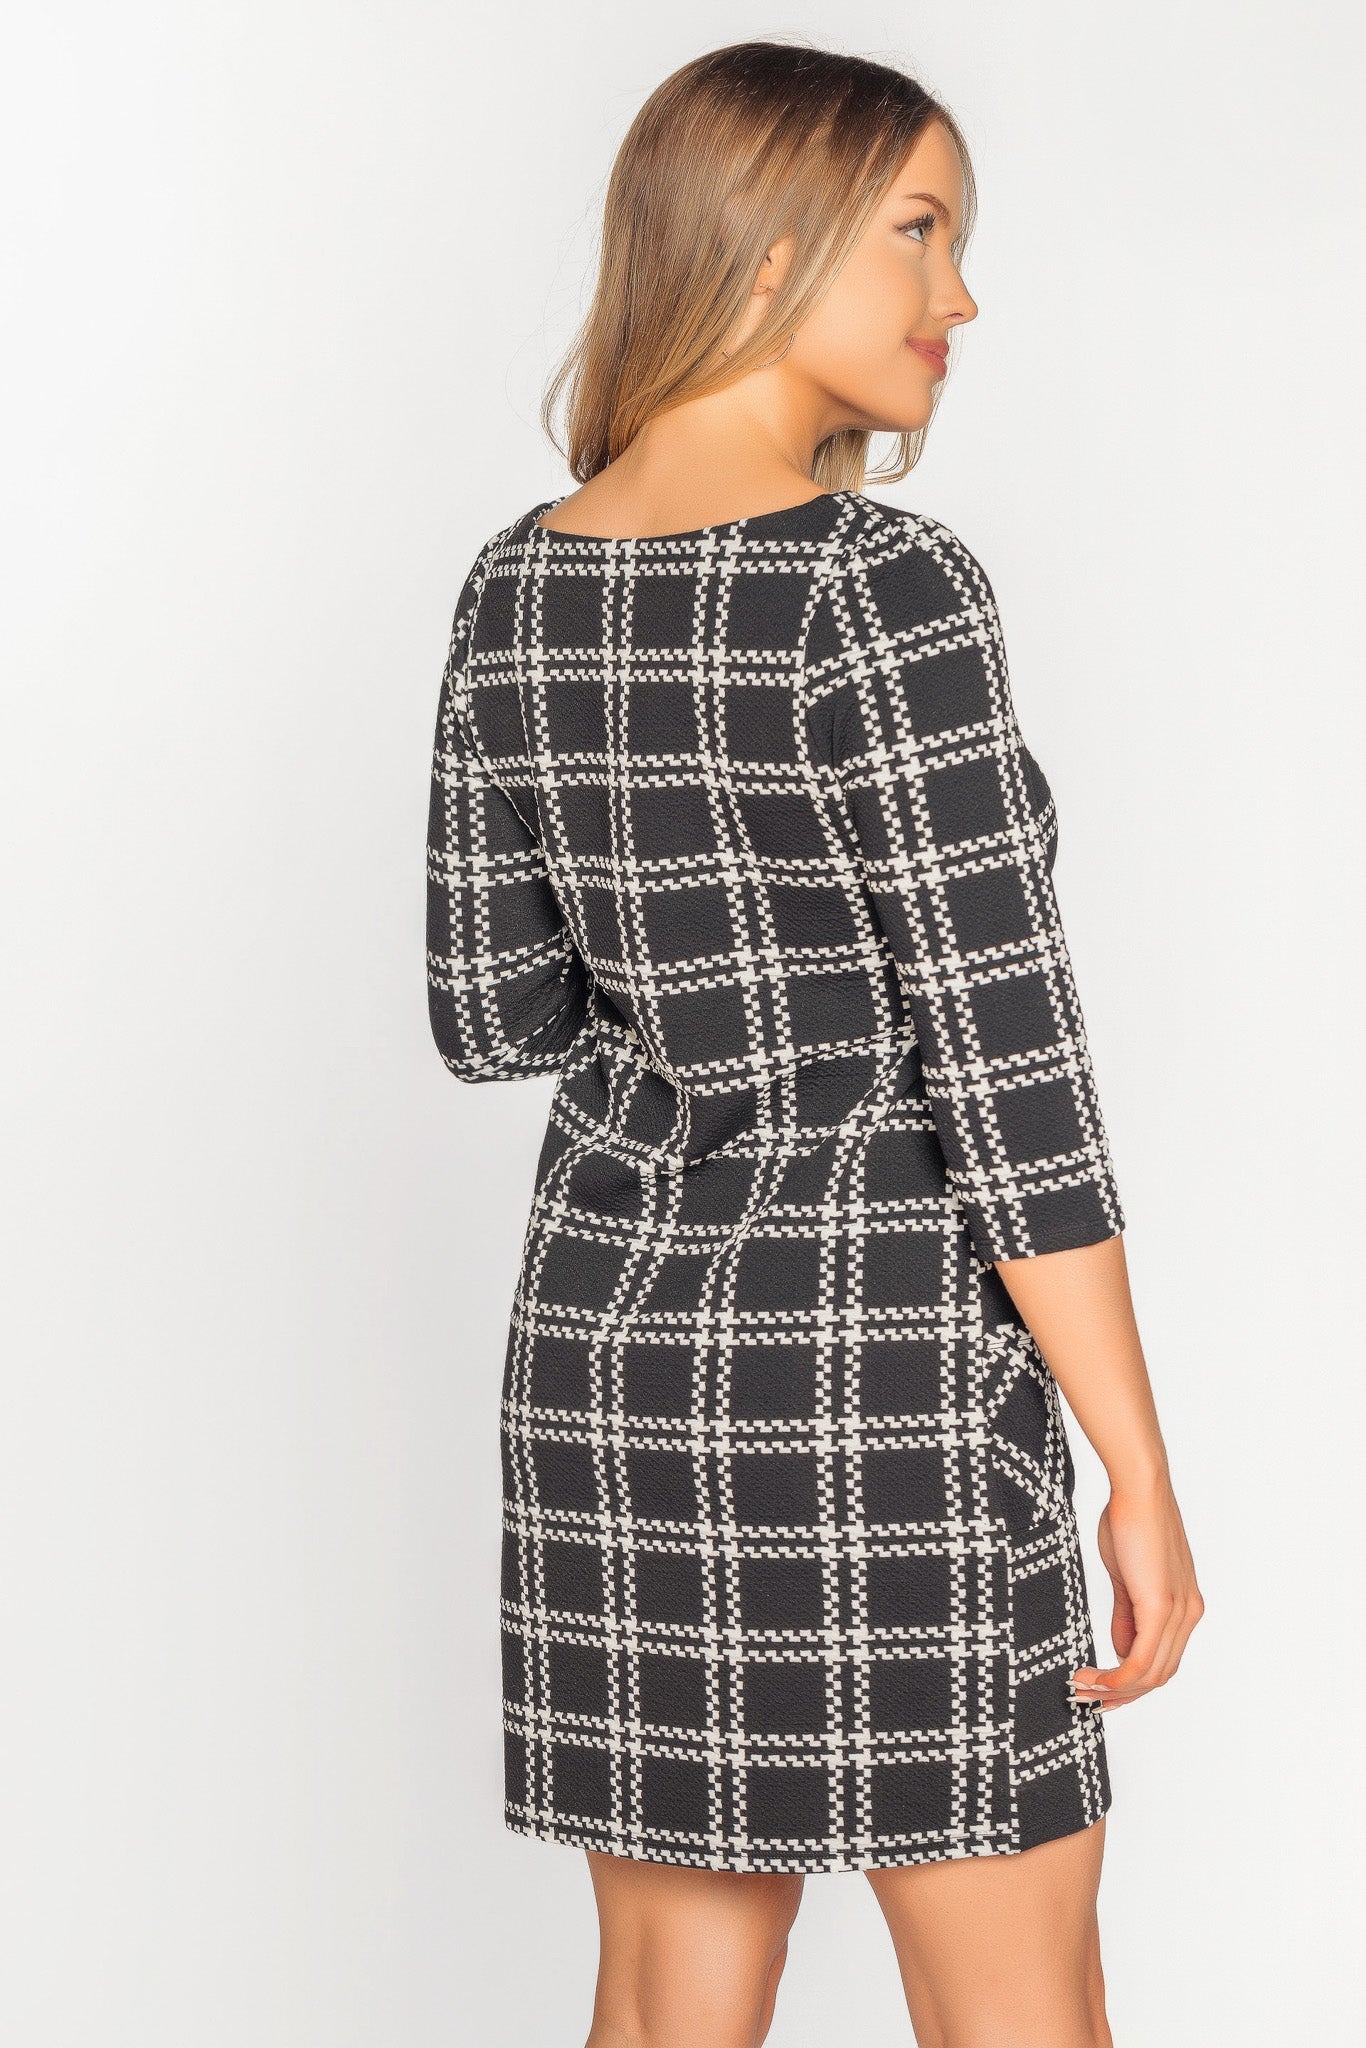 Checker 3/4 Sleeve Dress with Pockets